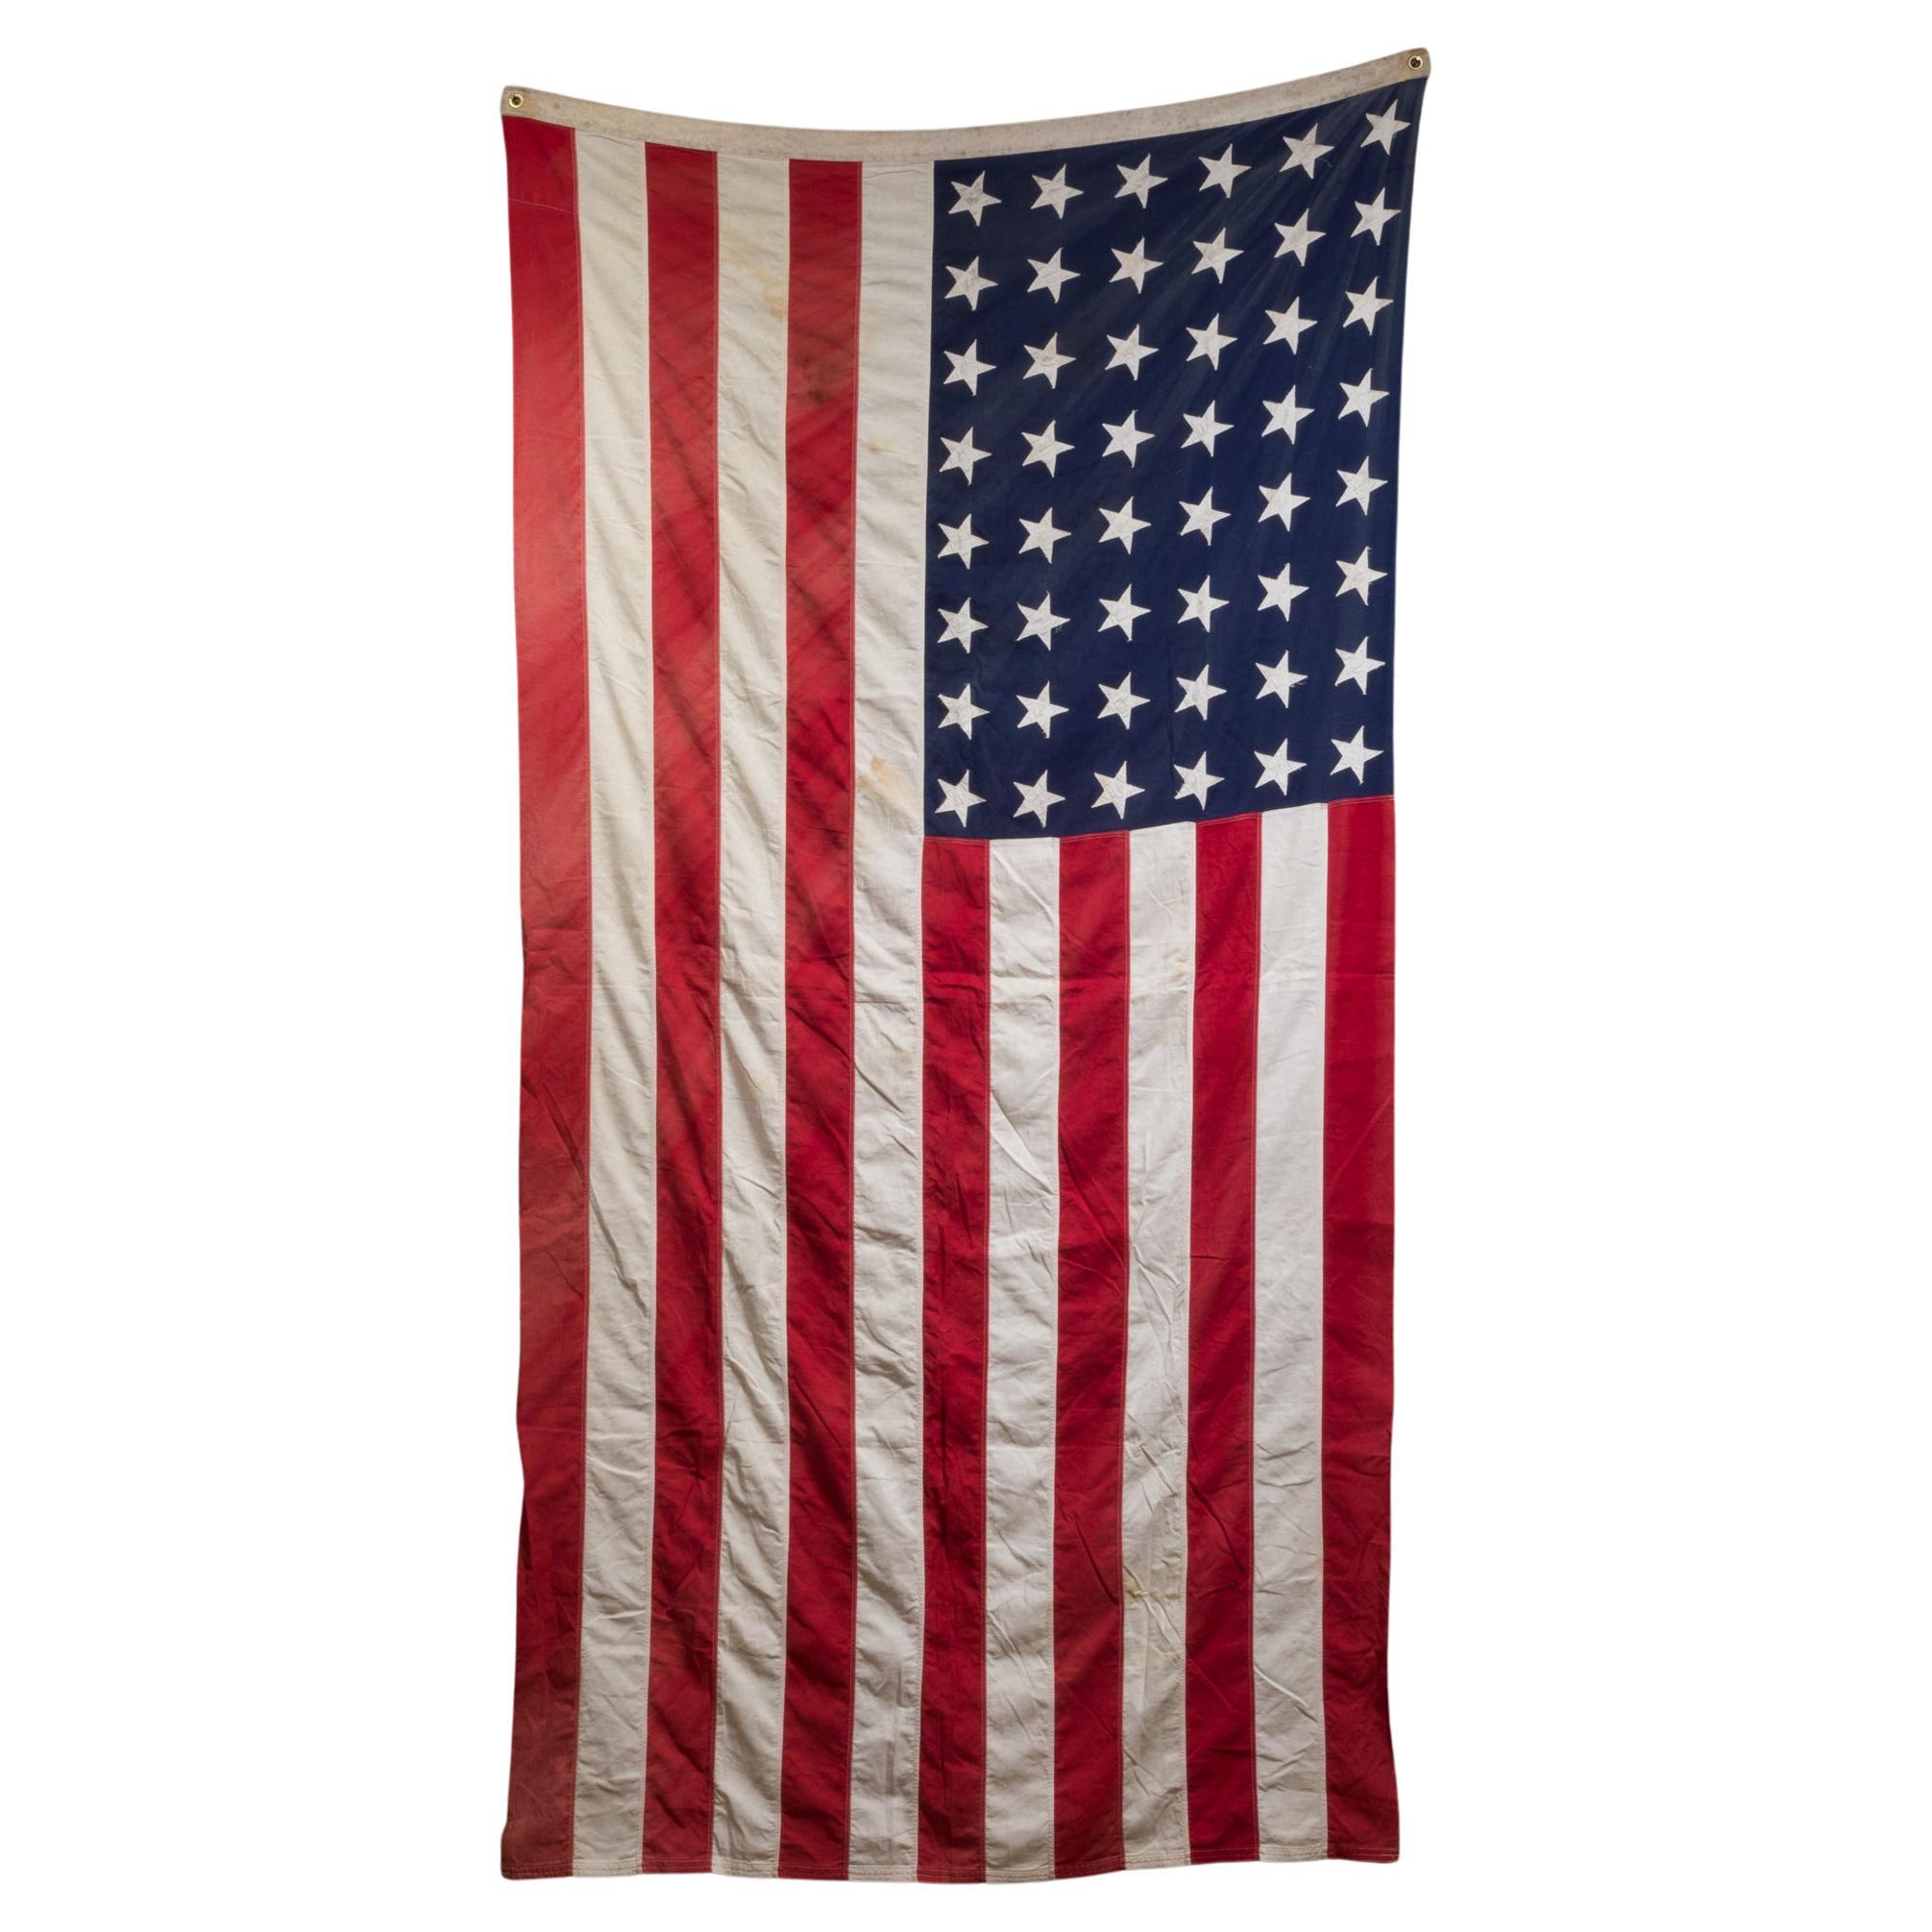 Early 20th C. Monumental American Flag with 48 Stars, c.1940-1950 For Sale